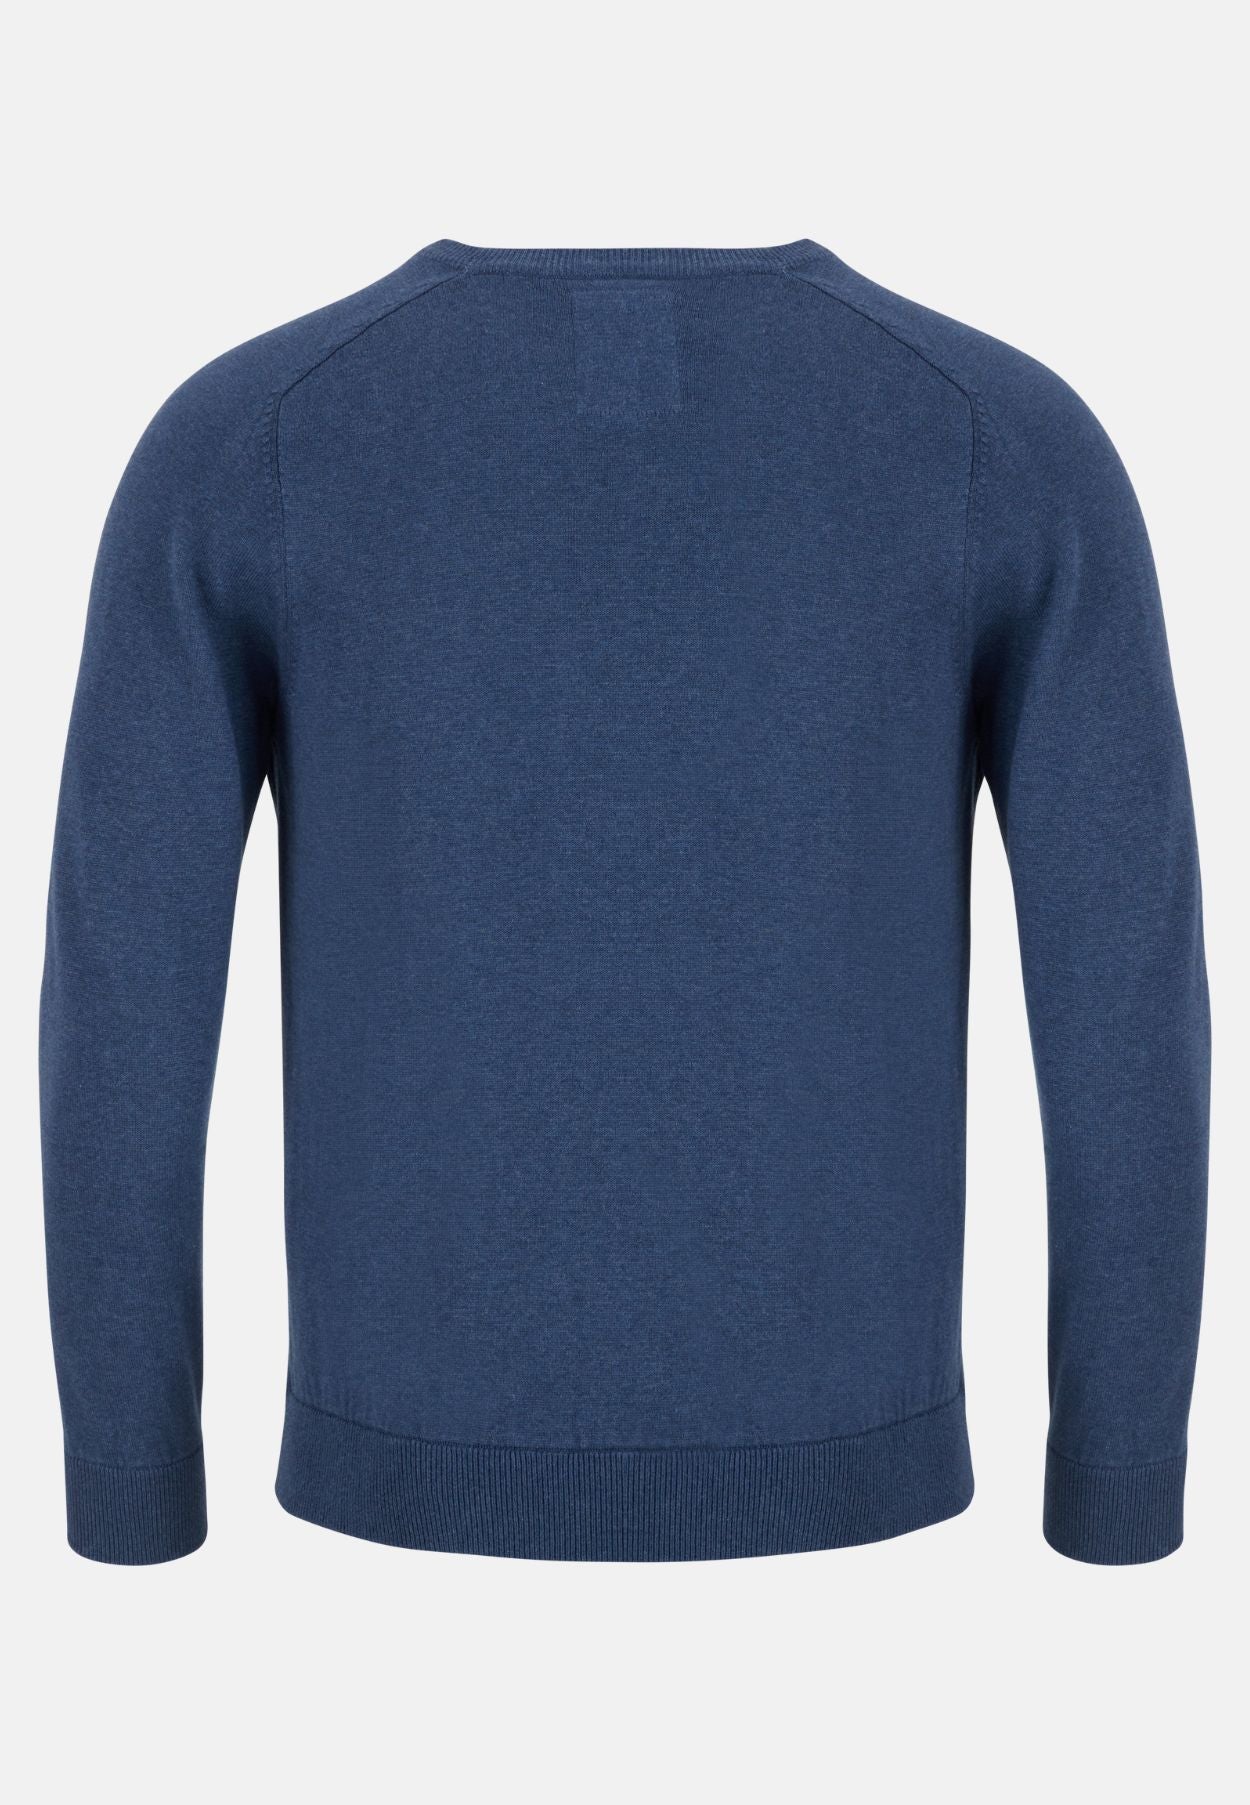 Queen Crew Neck Knitwear - Blue Chine-Back View